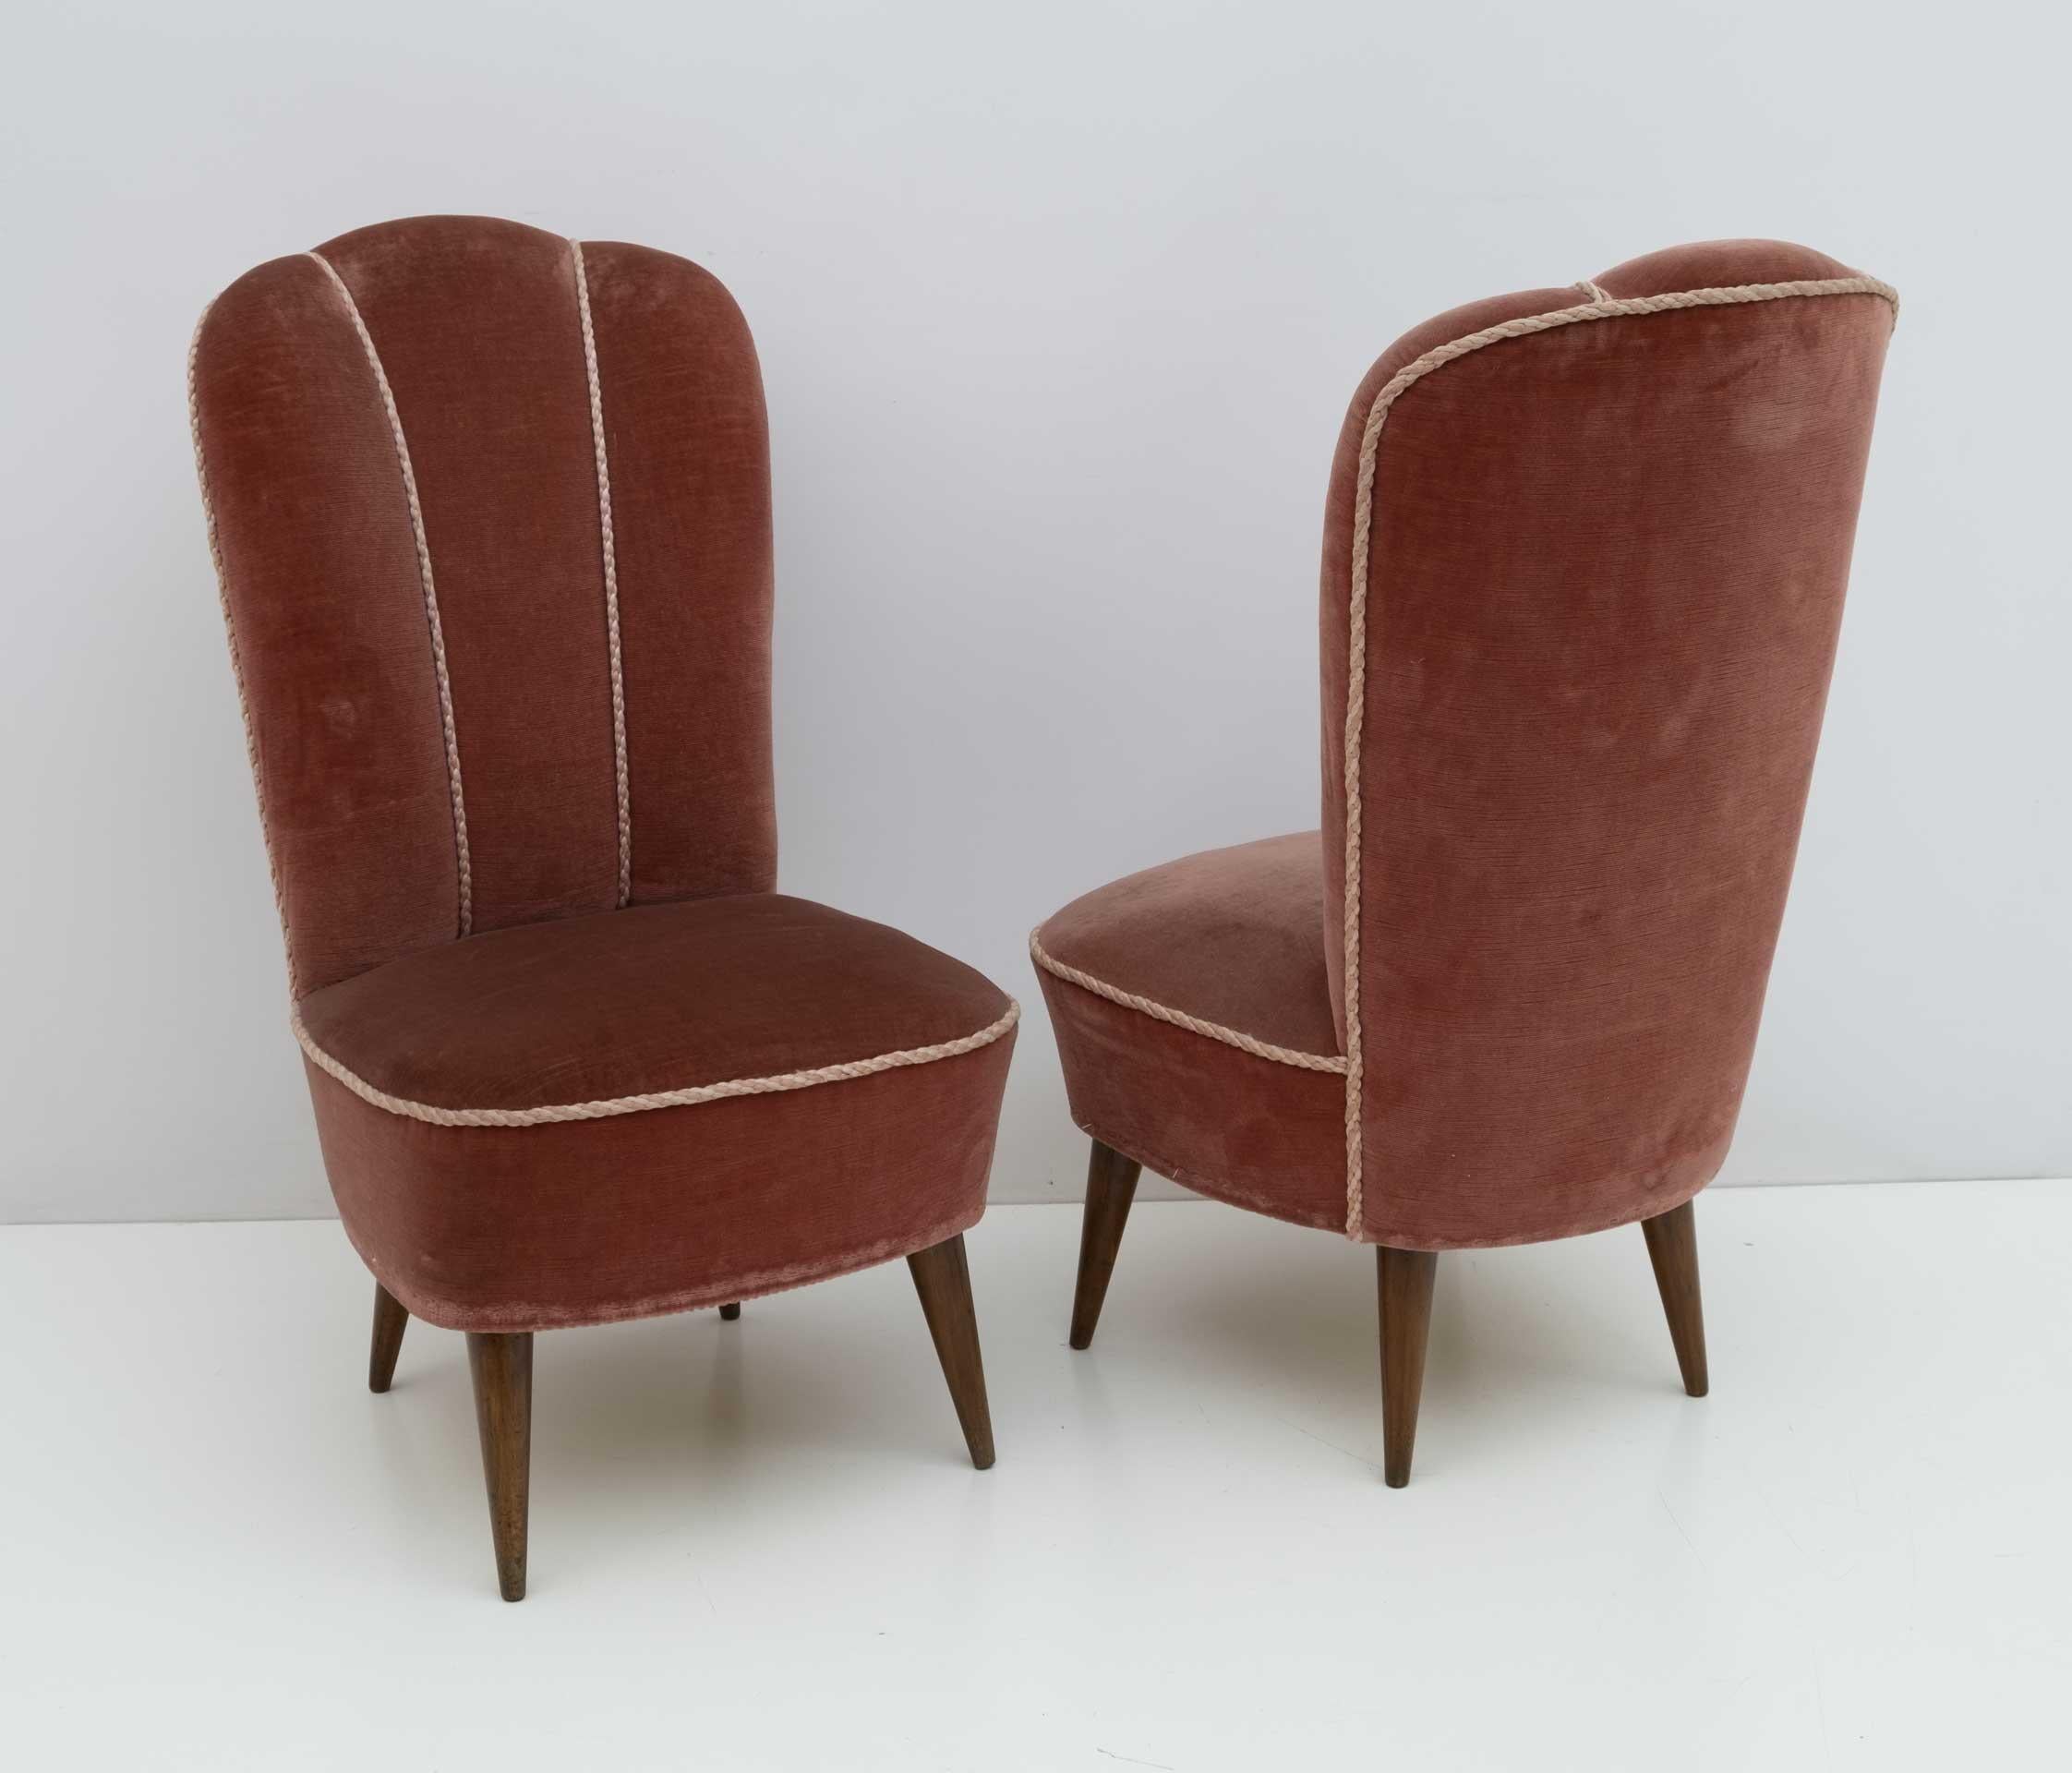 Pair of small Margherita model armchairs with high and comfortable backrest, conical beech foot, upholstery in good condition.
The velvet is original from the period but a new upholstery is recommended.
Attributed by Gio Ponti and produced by